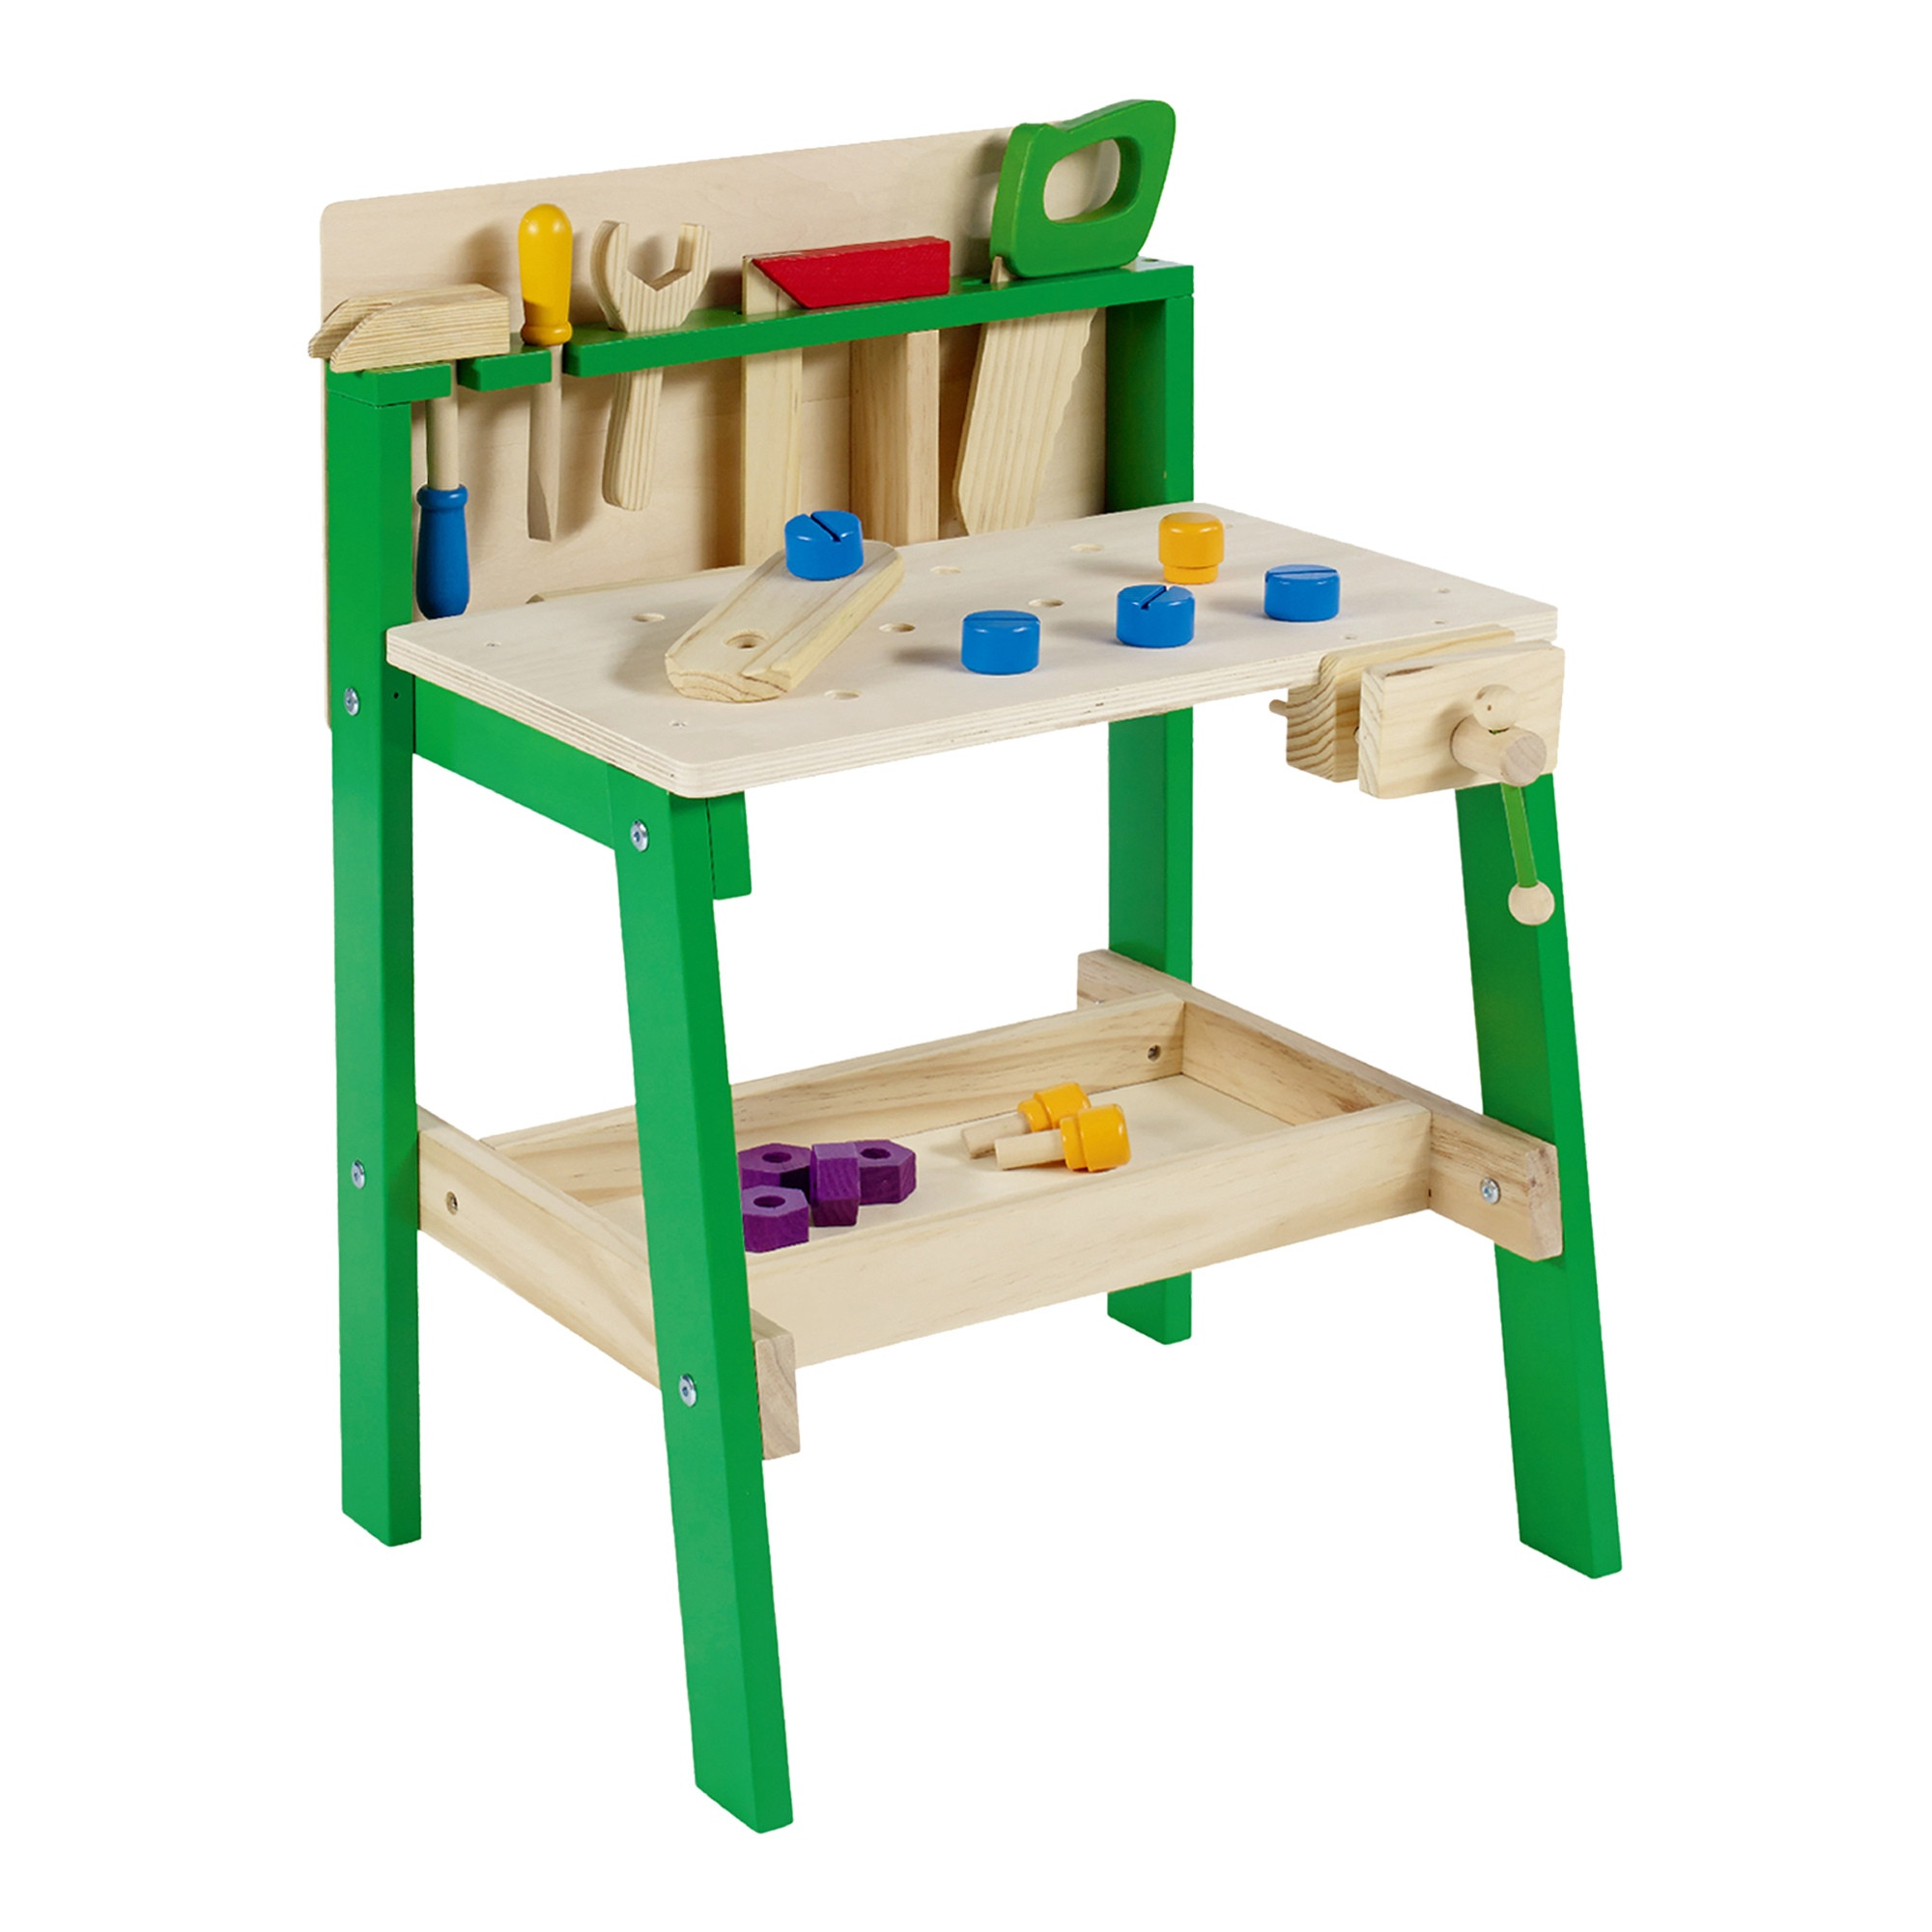 Kids Work Table
 Kids Tool Work Bench Wooden DIY Table Work Creative Role